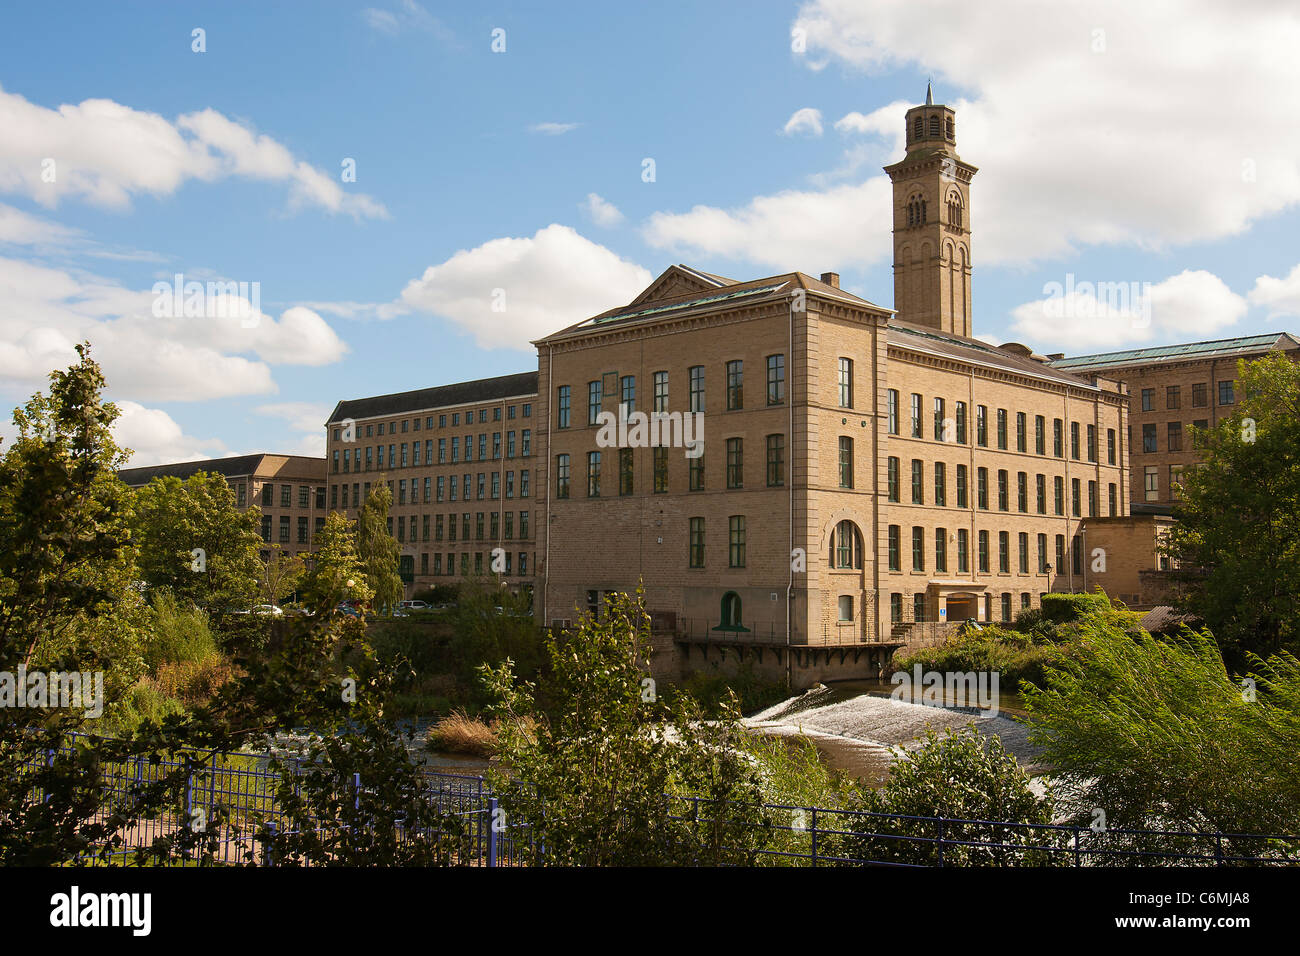 Sir Titus Salt's Saltaire woolen and textile mill, Shipley, West Yorkshire, England, UK Stock Photo